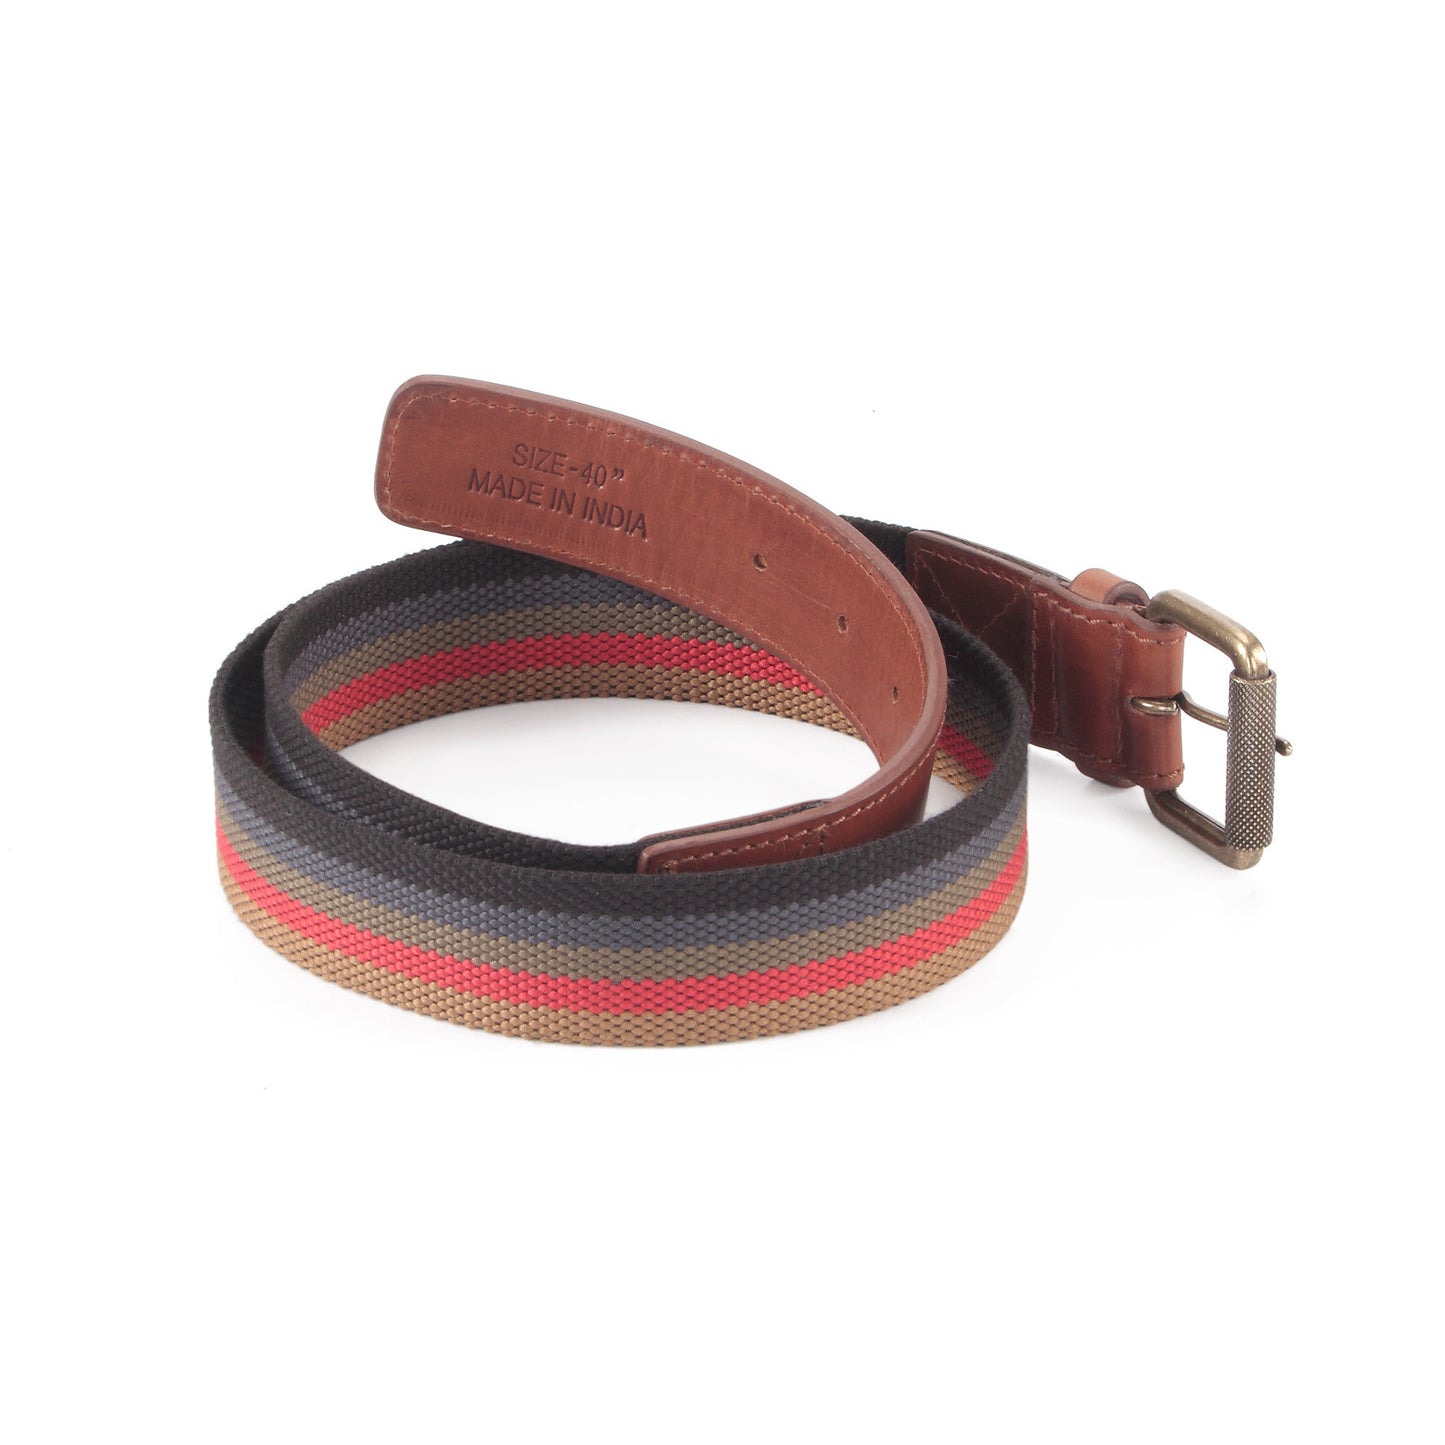 390190 - One and a Half Inch Wide Leather Webbing Combination Belt - brandy color leather - back view